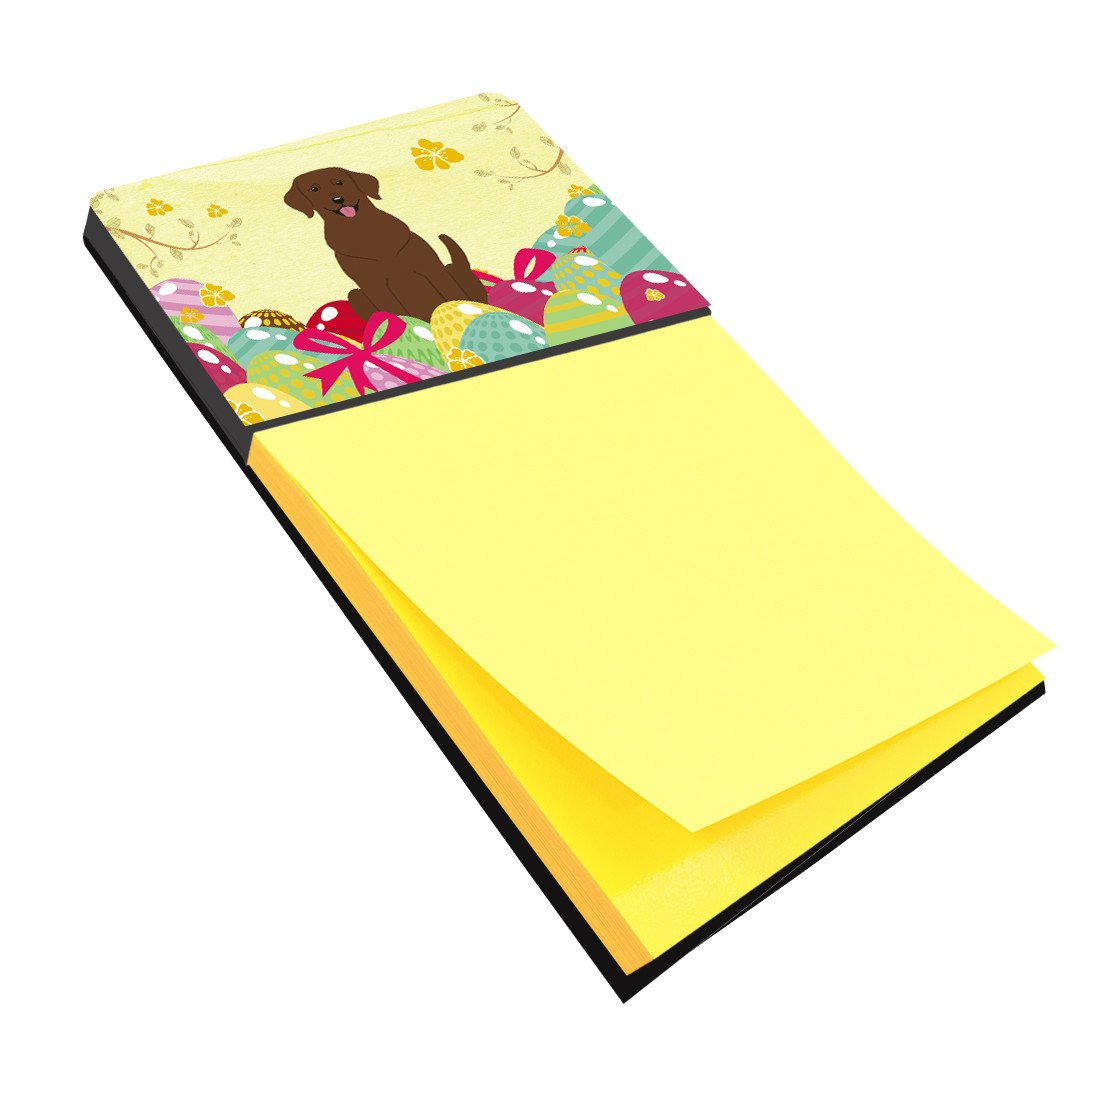 Easter Eggs Chocolate Labrador Sticky Note Holder BB6056SN by Caroline's Treasures